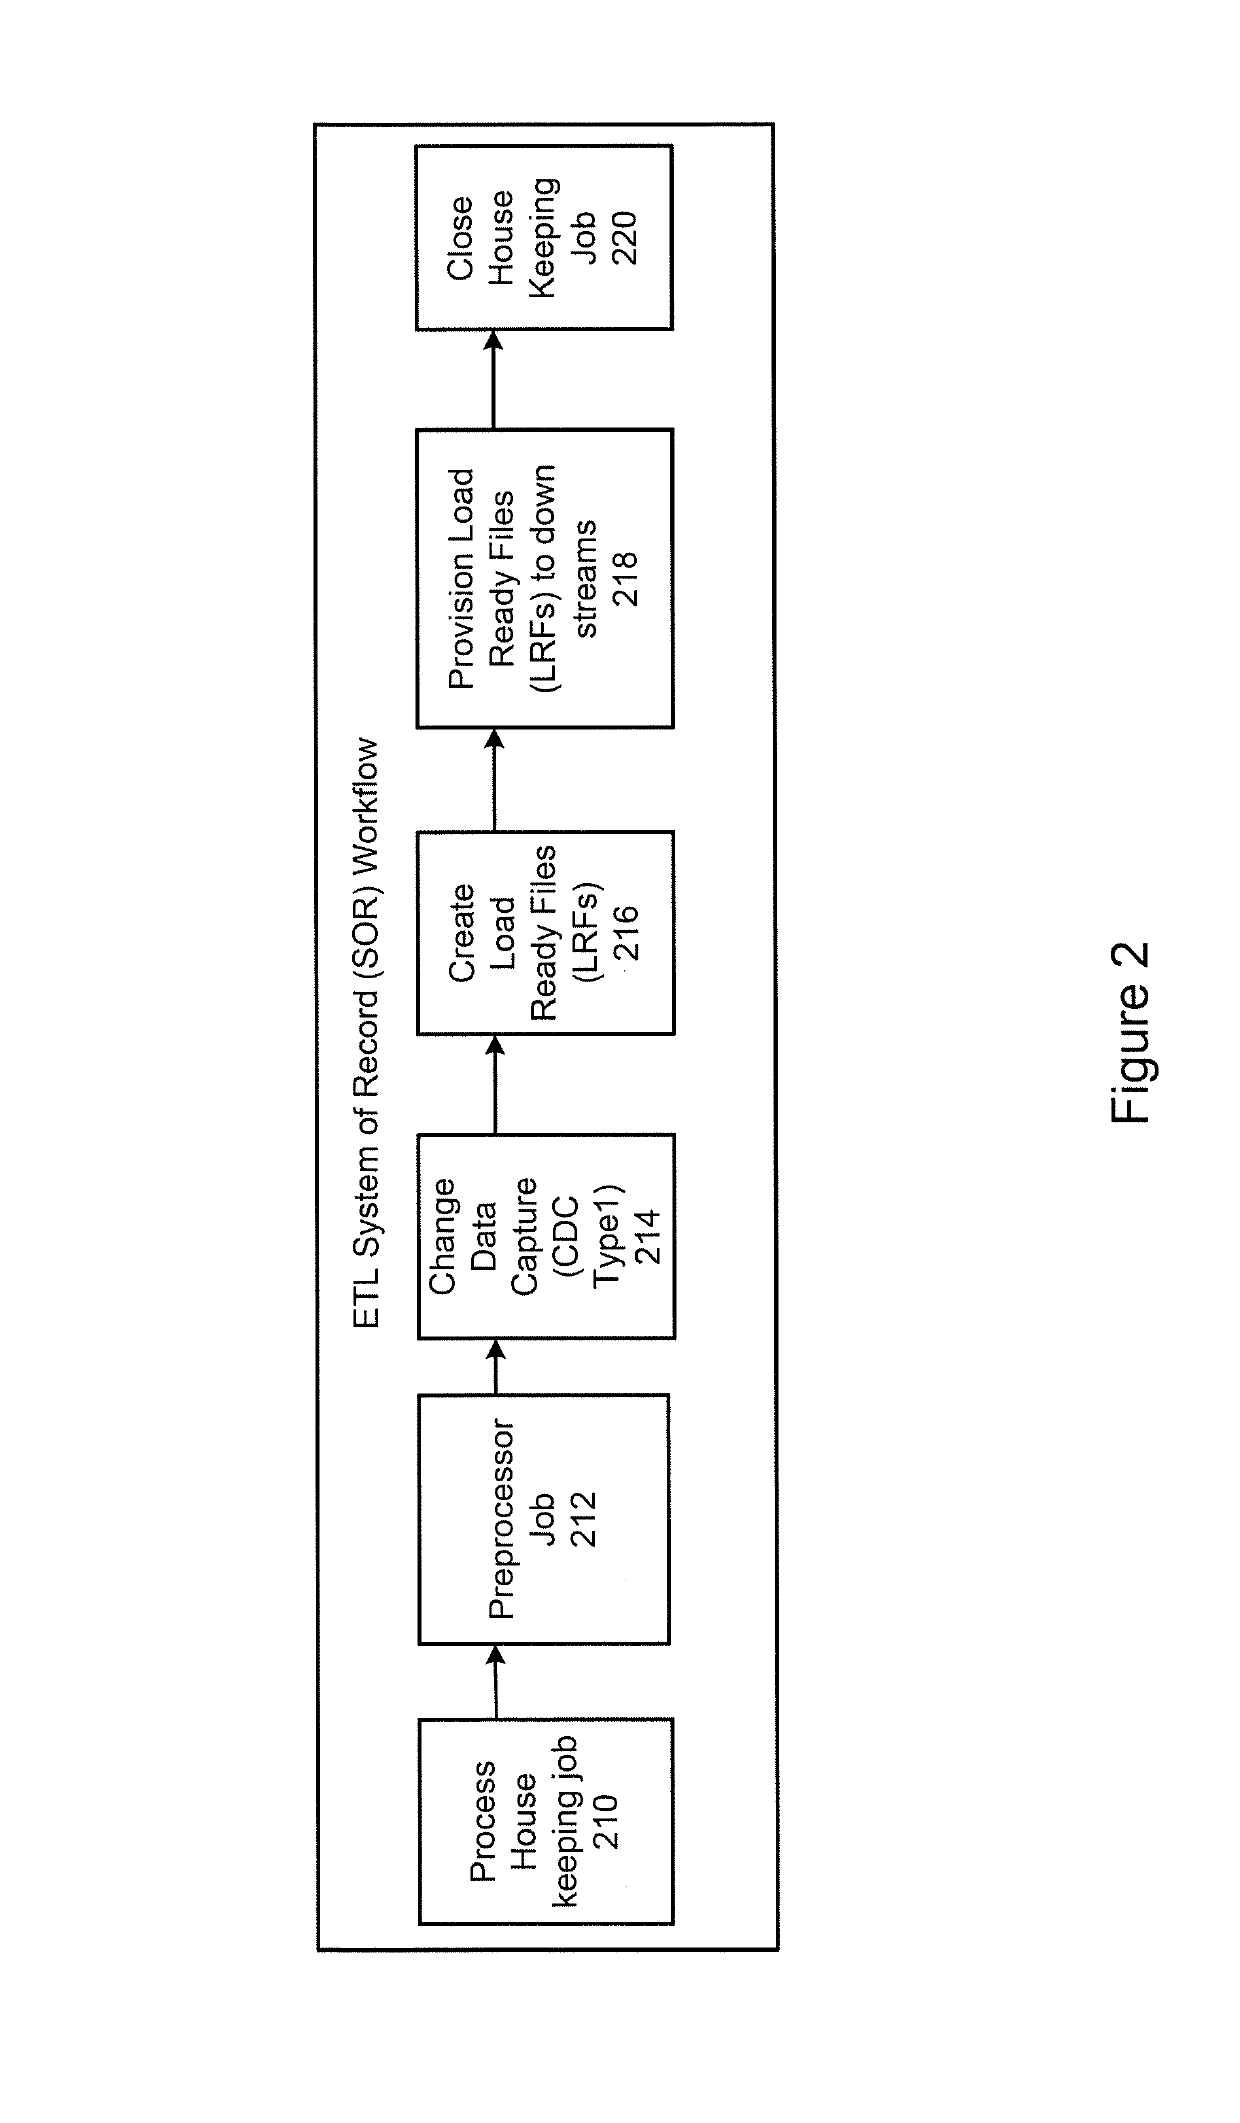 System and method for achieving optimal change data capture (CDC) on hadoop